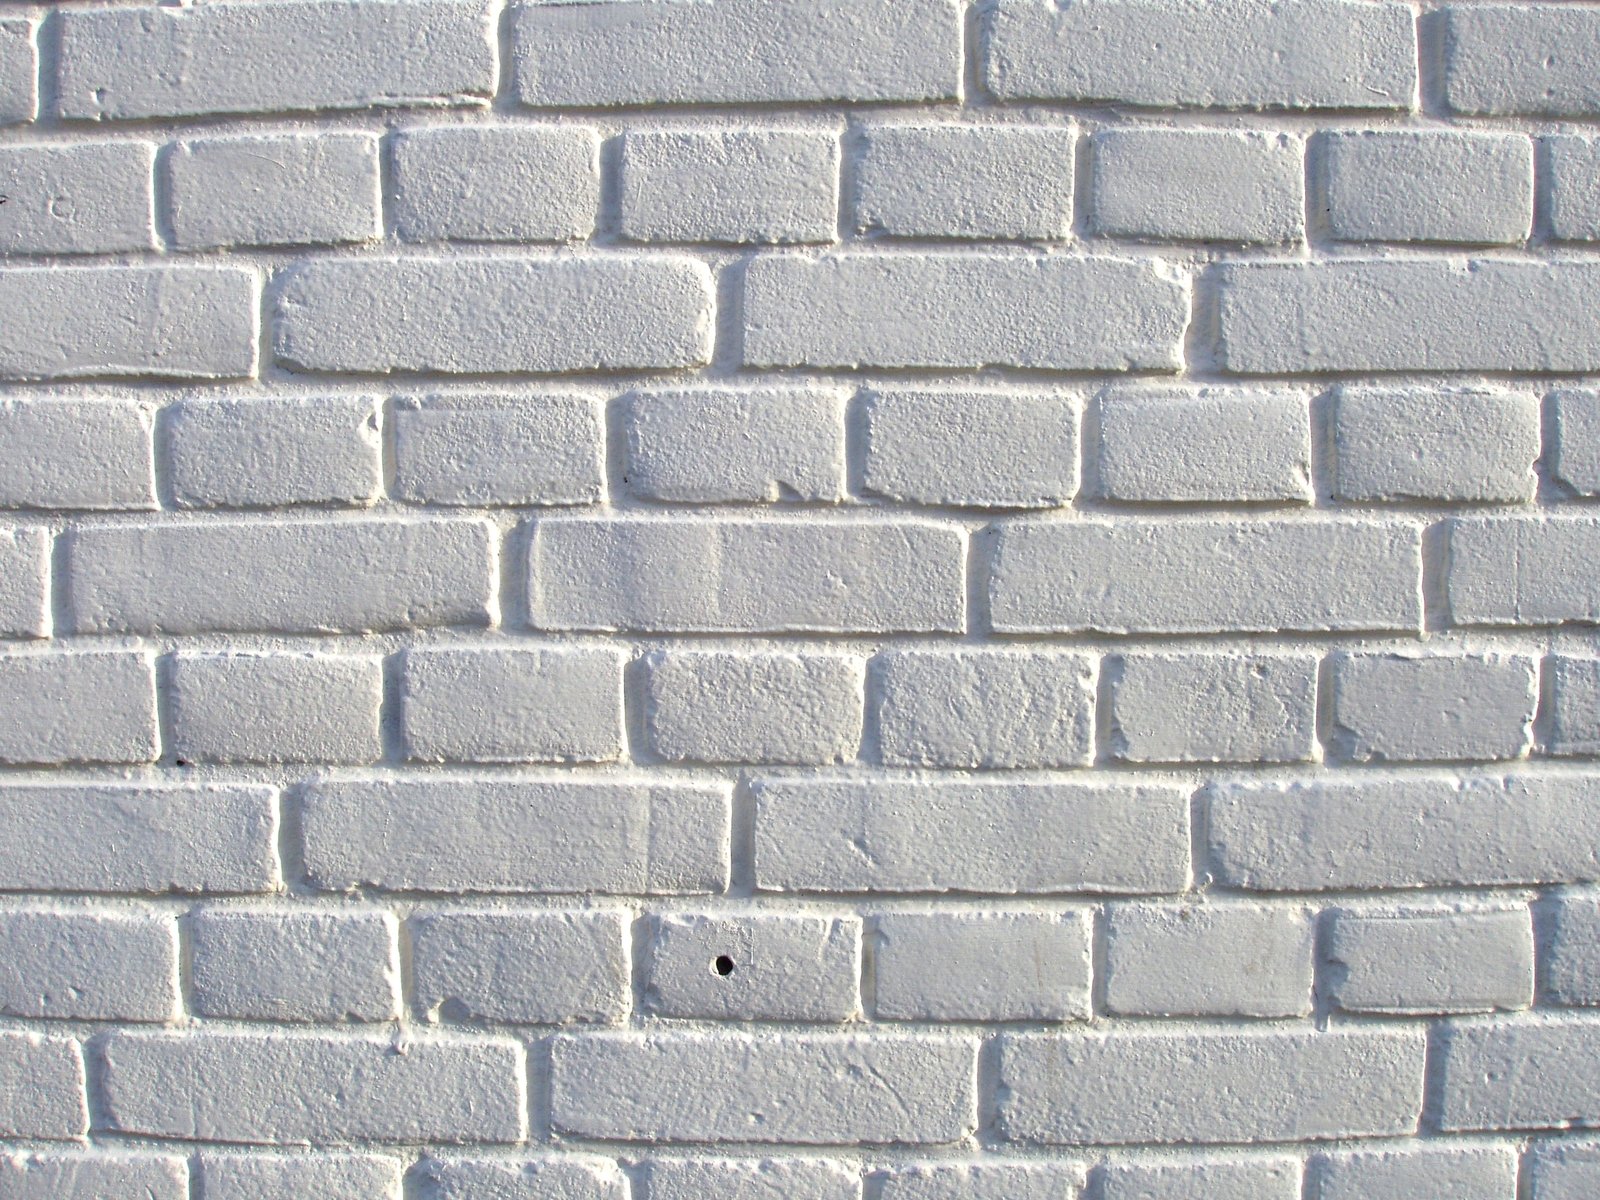 Free brick wall Images, Pictures, and Royalty-Free Stock Photos ...